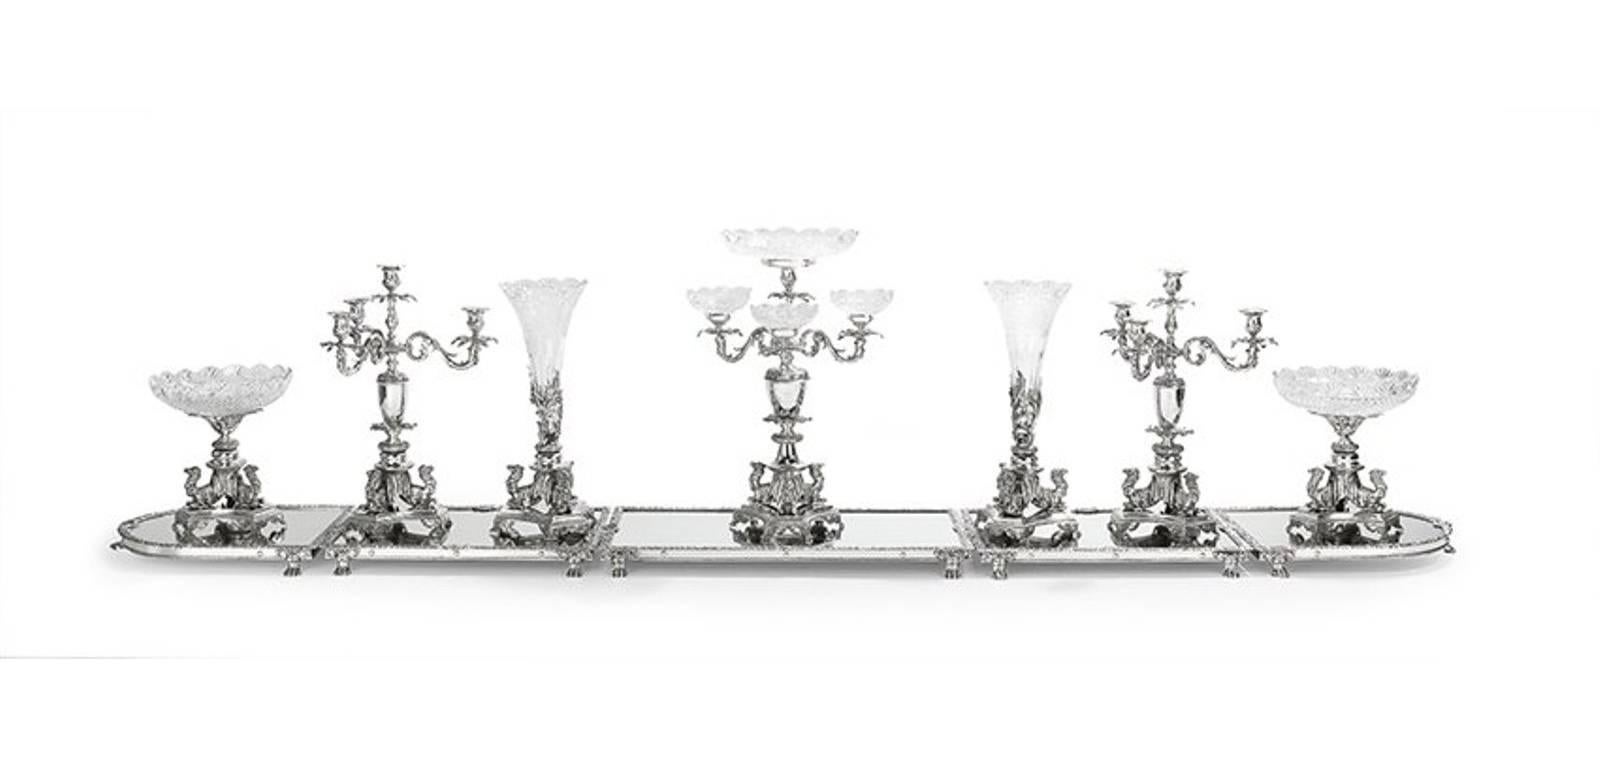 12-piece Egyptian Revival silver plate and cut-glass Surtout de table service

In the Victorian manner, for the orientalist market, marks for Sheffield.

Comprised of a three-arm epergne ht. 20 1/2, 
a pair three-light candelabra ht. 19, 
pair